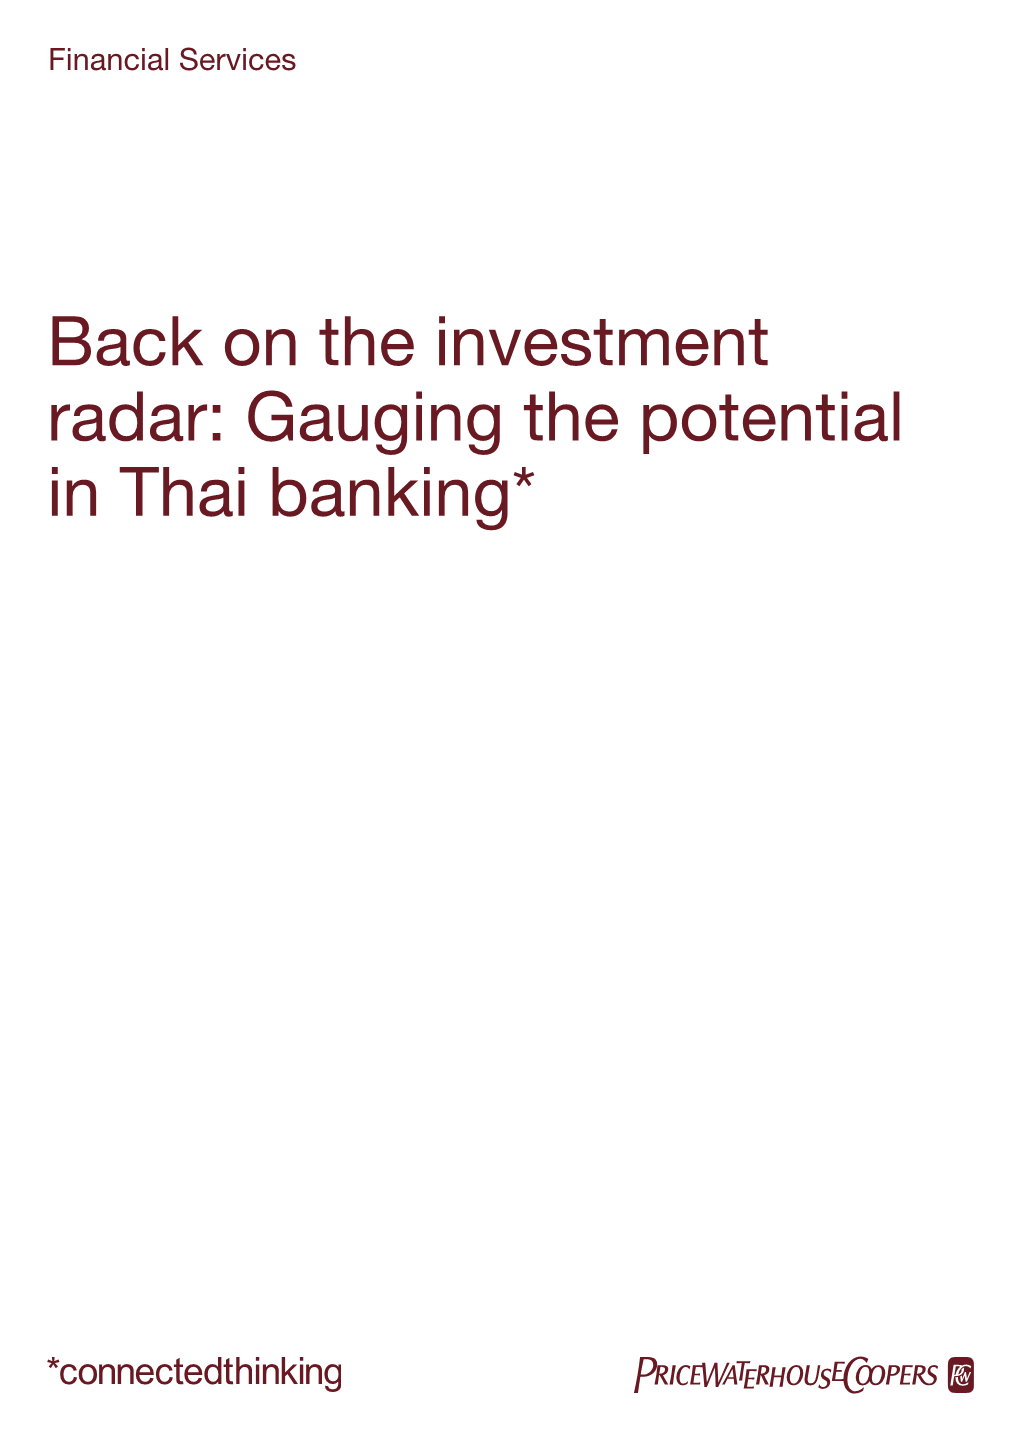 Gauging the Potential in Thai Banking* Introduction Overview